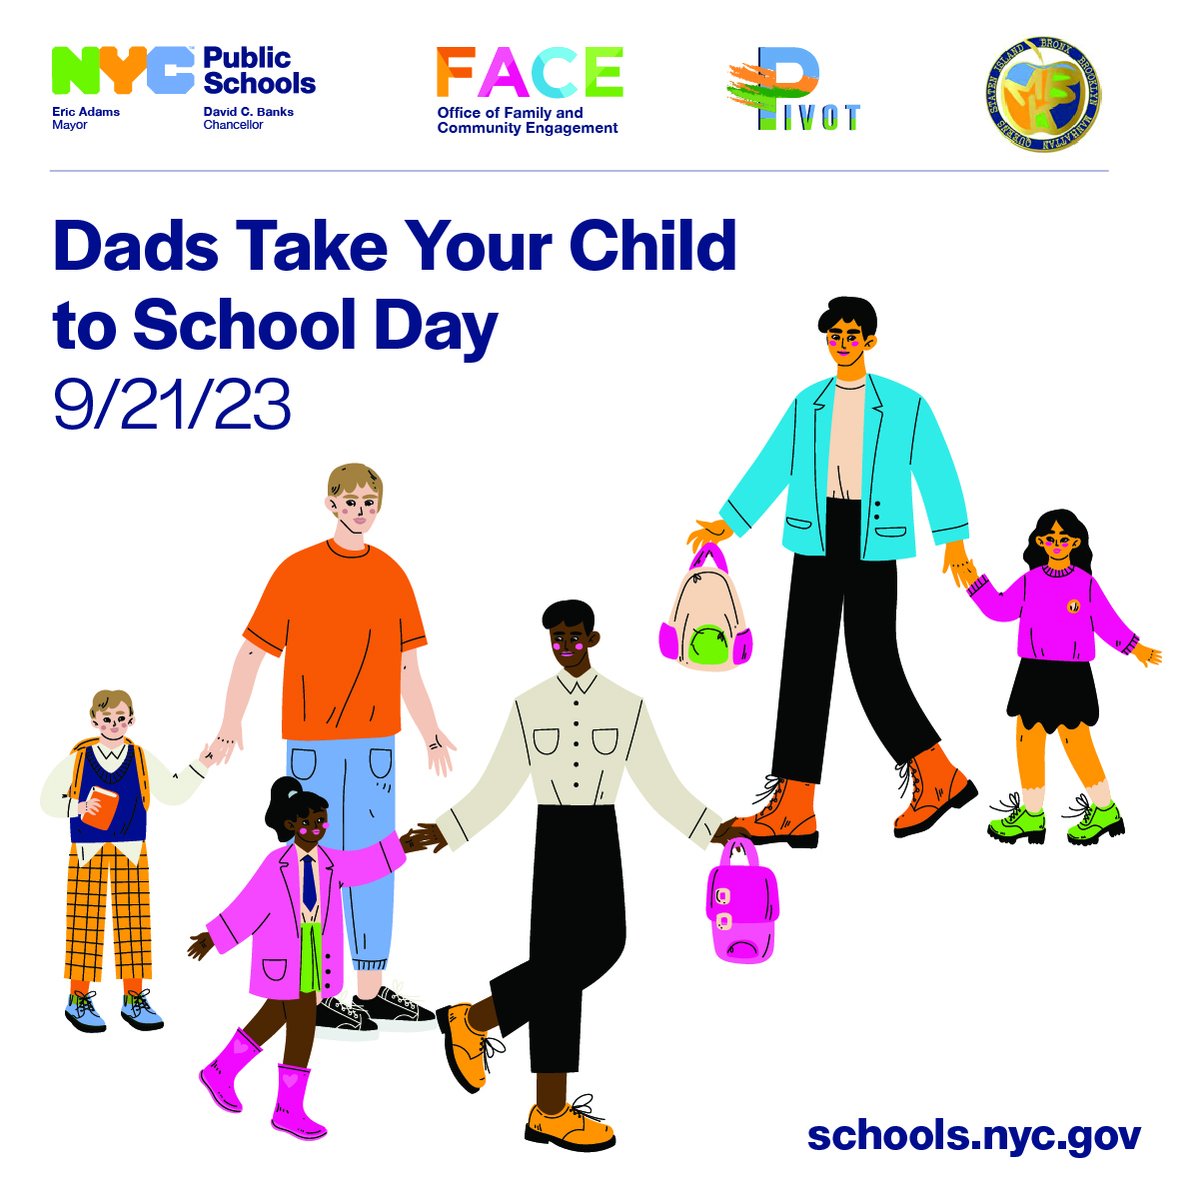 Tomorrow is Dads Take Your Child to School Day! We hope to see as many dads rolling through as possible.